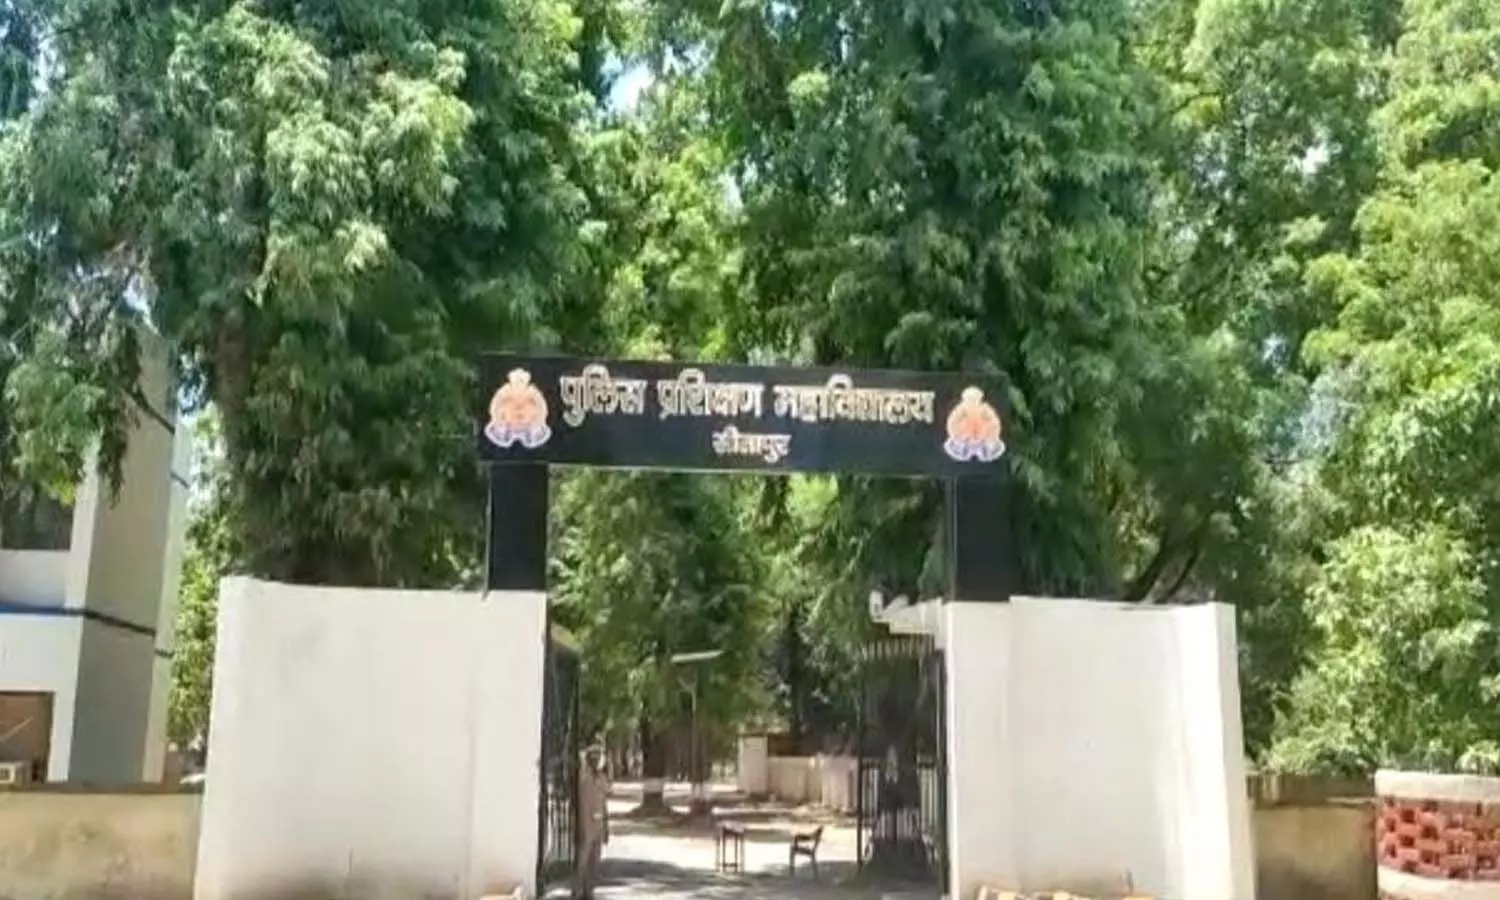 IPS officer including ADG posted in Sitapur PTC accused of forcibly making meat from Hindu employees